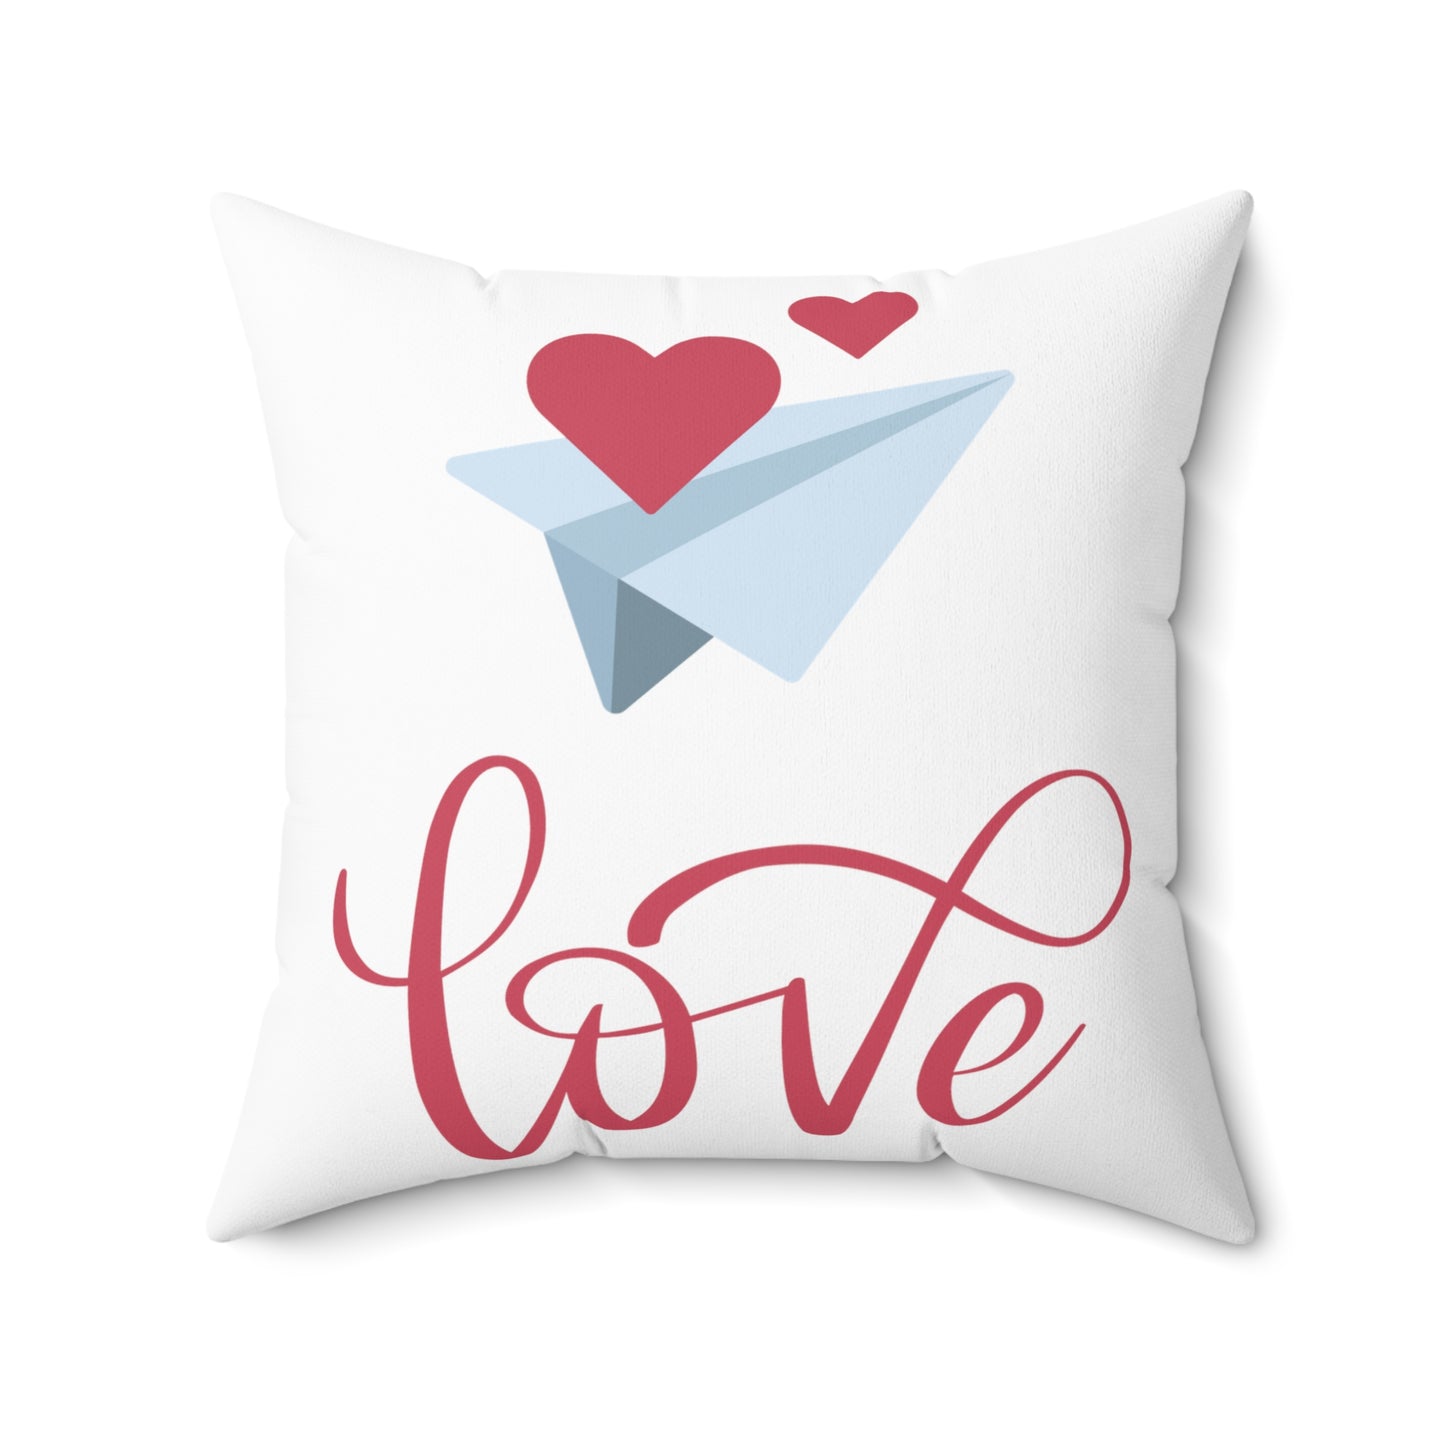 Love with Flying Hearts Prtinted Sqaure Pillow Case for Valentine